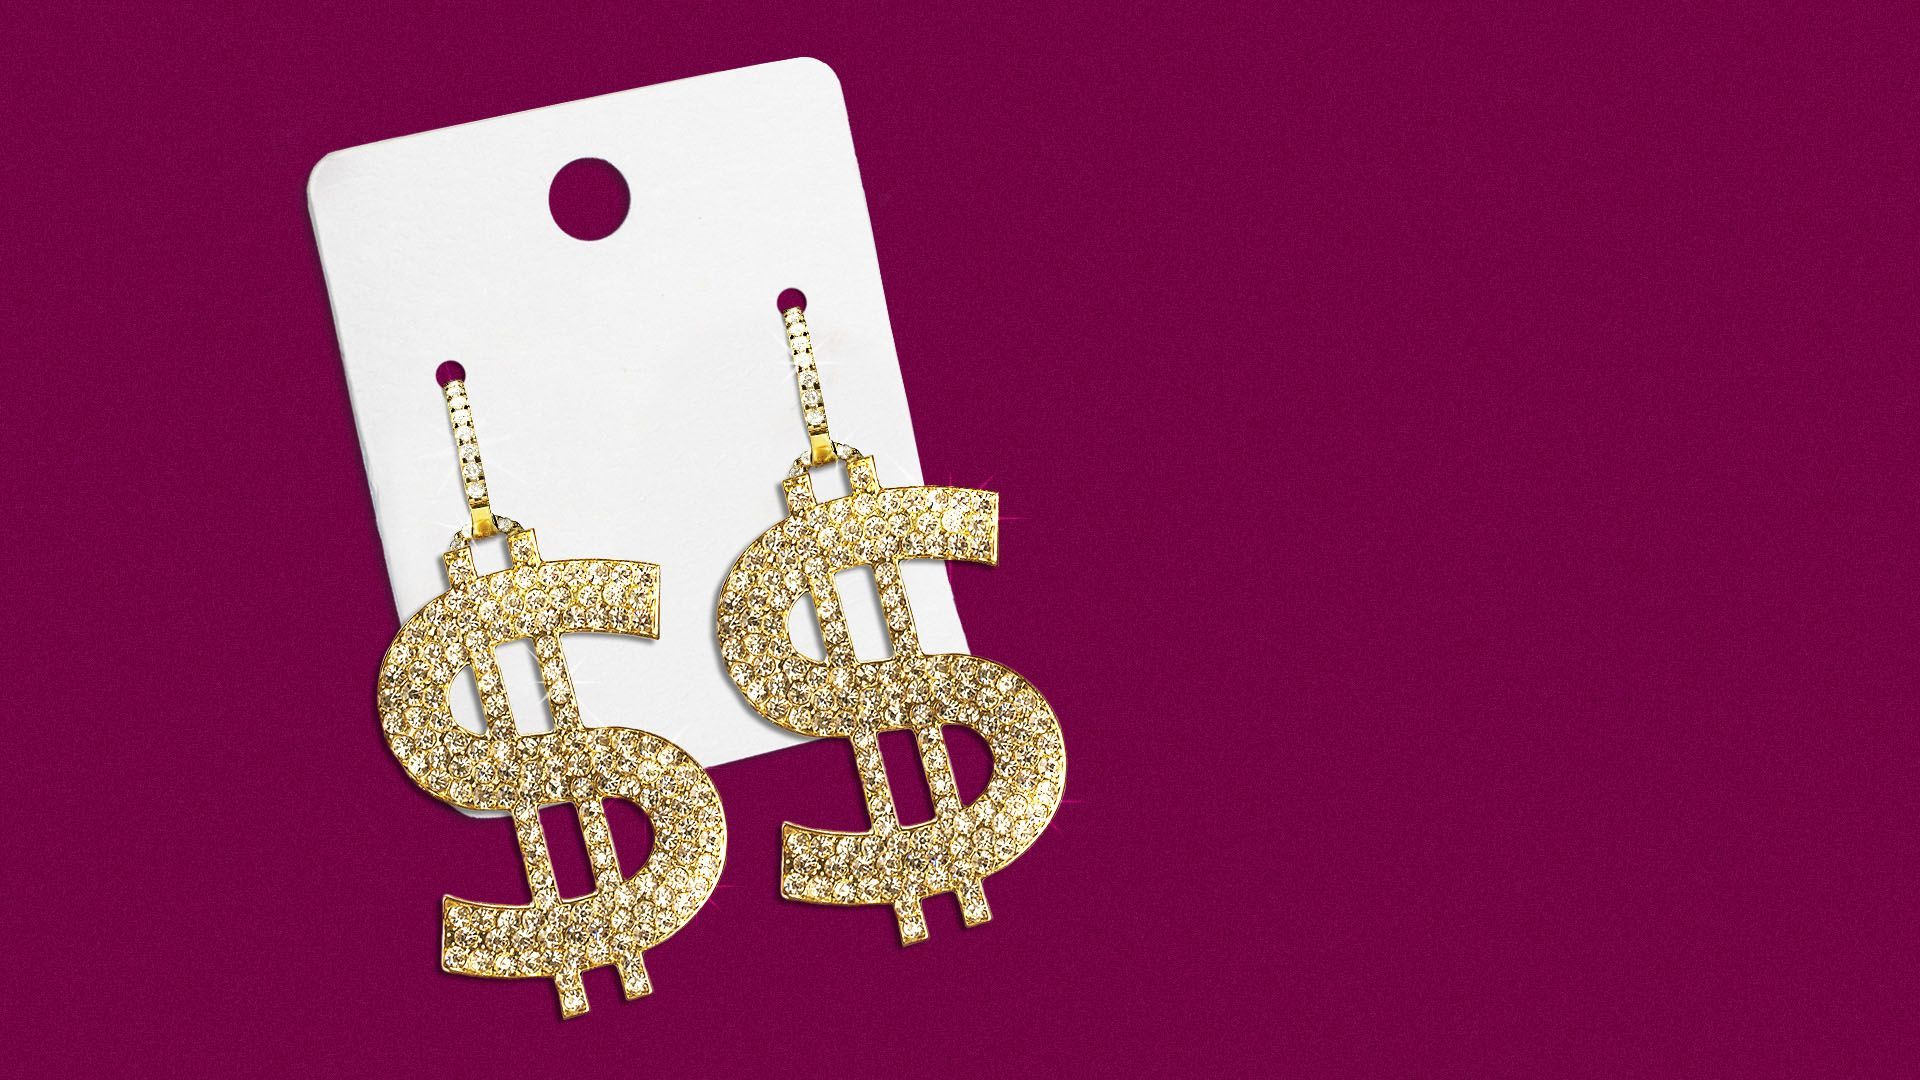 an illustration of gold and diamond money sign shaped earrings on a paper backing 